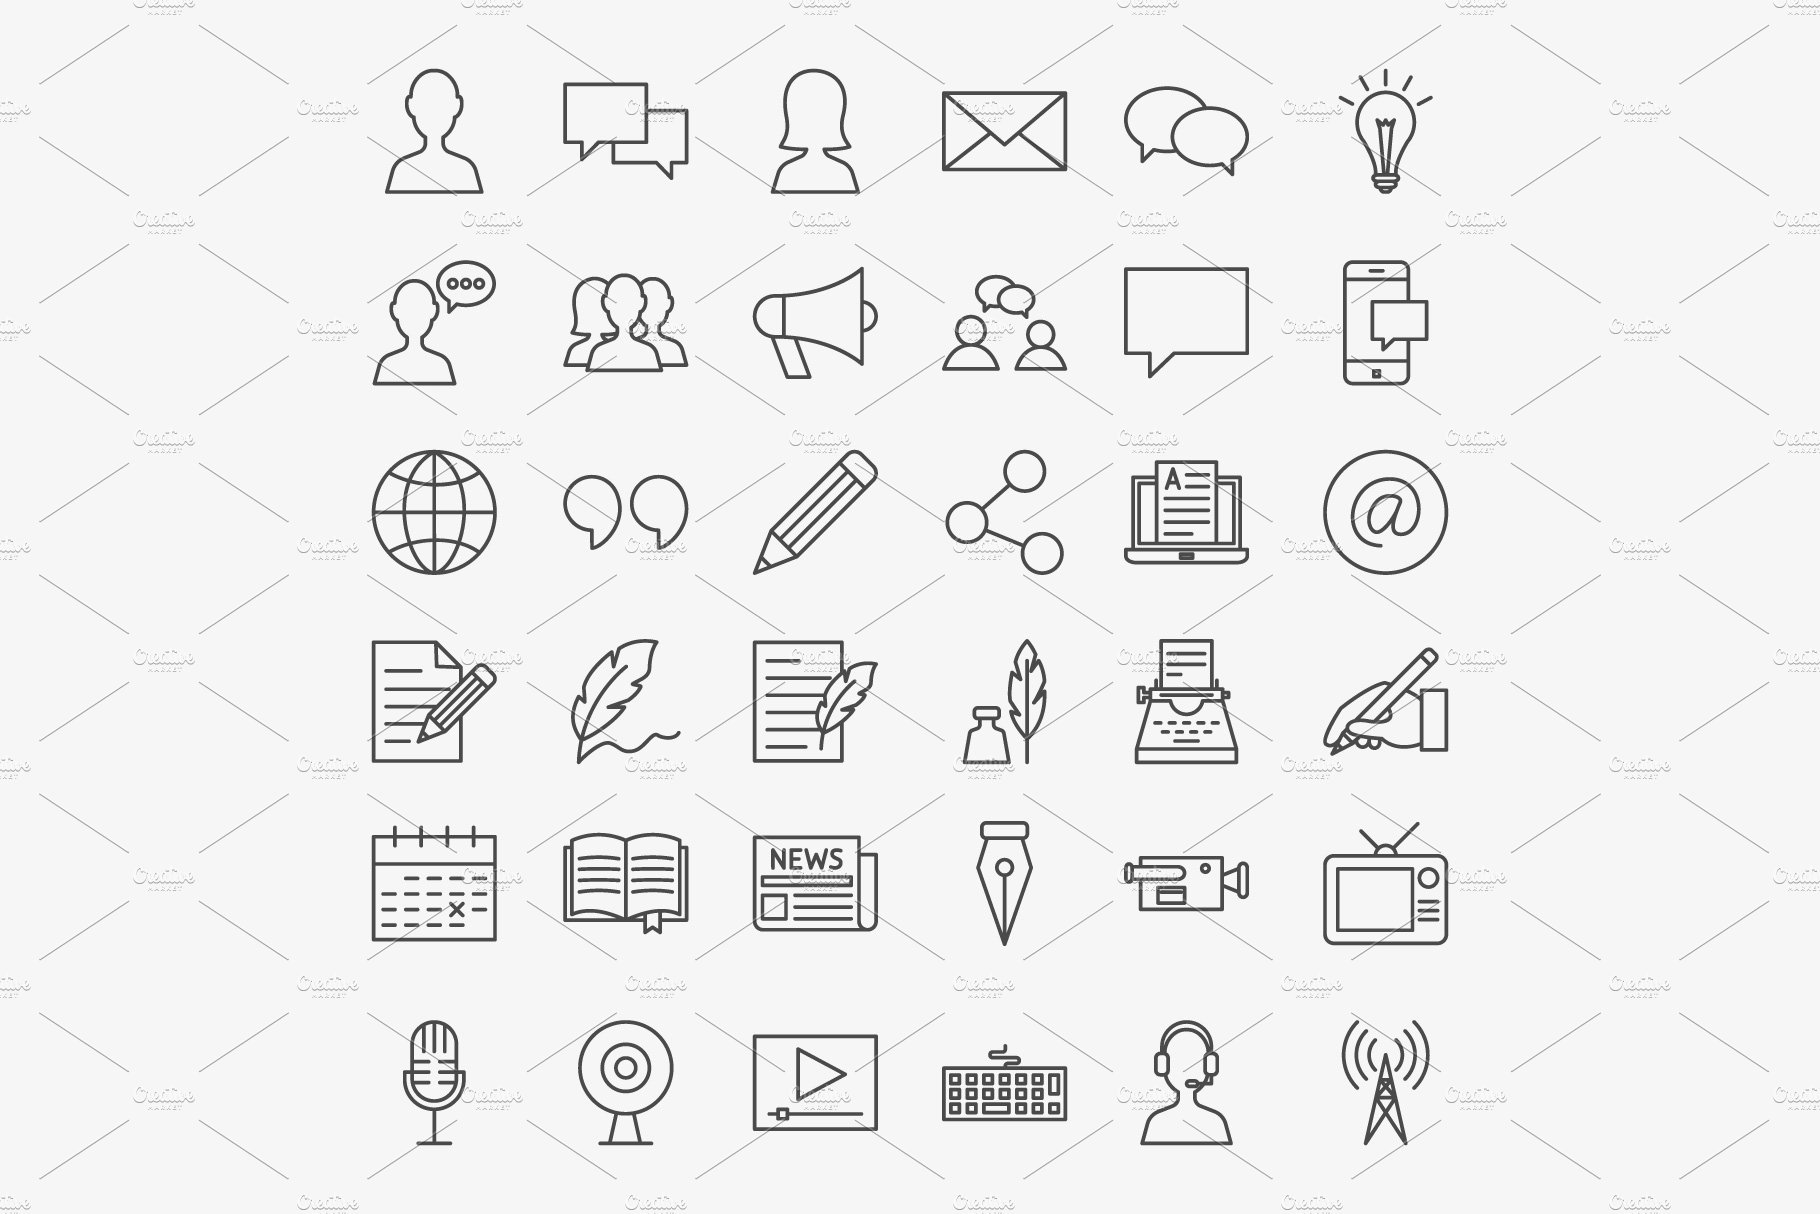 Classic outline icons in a simple style.